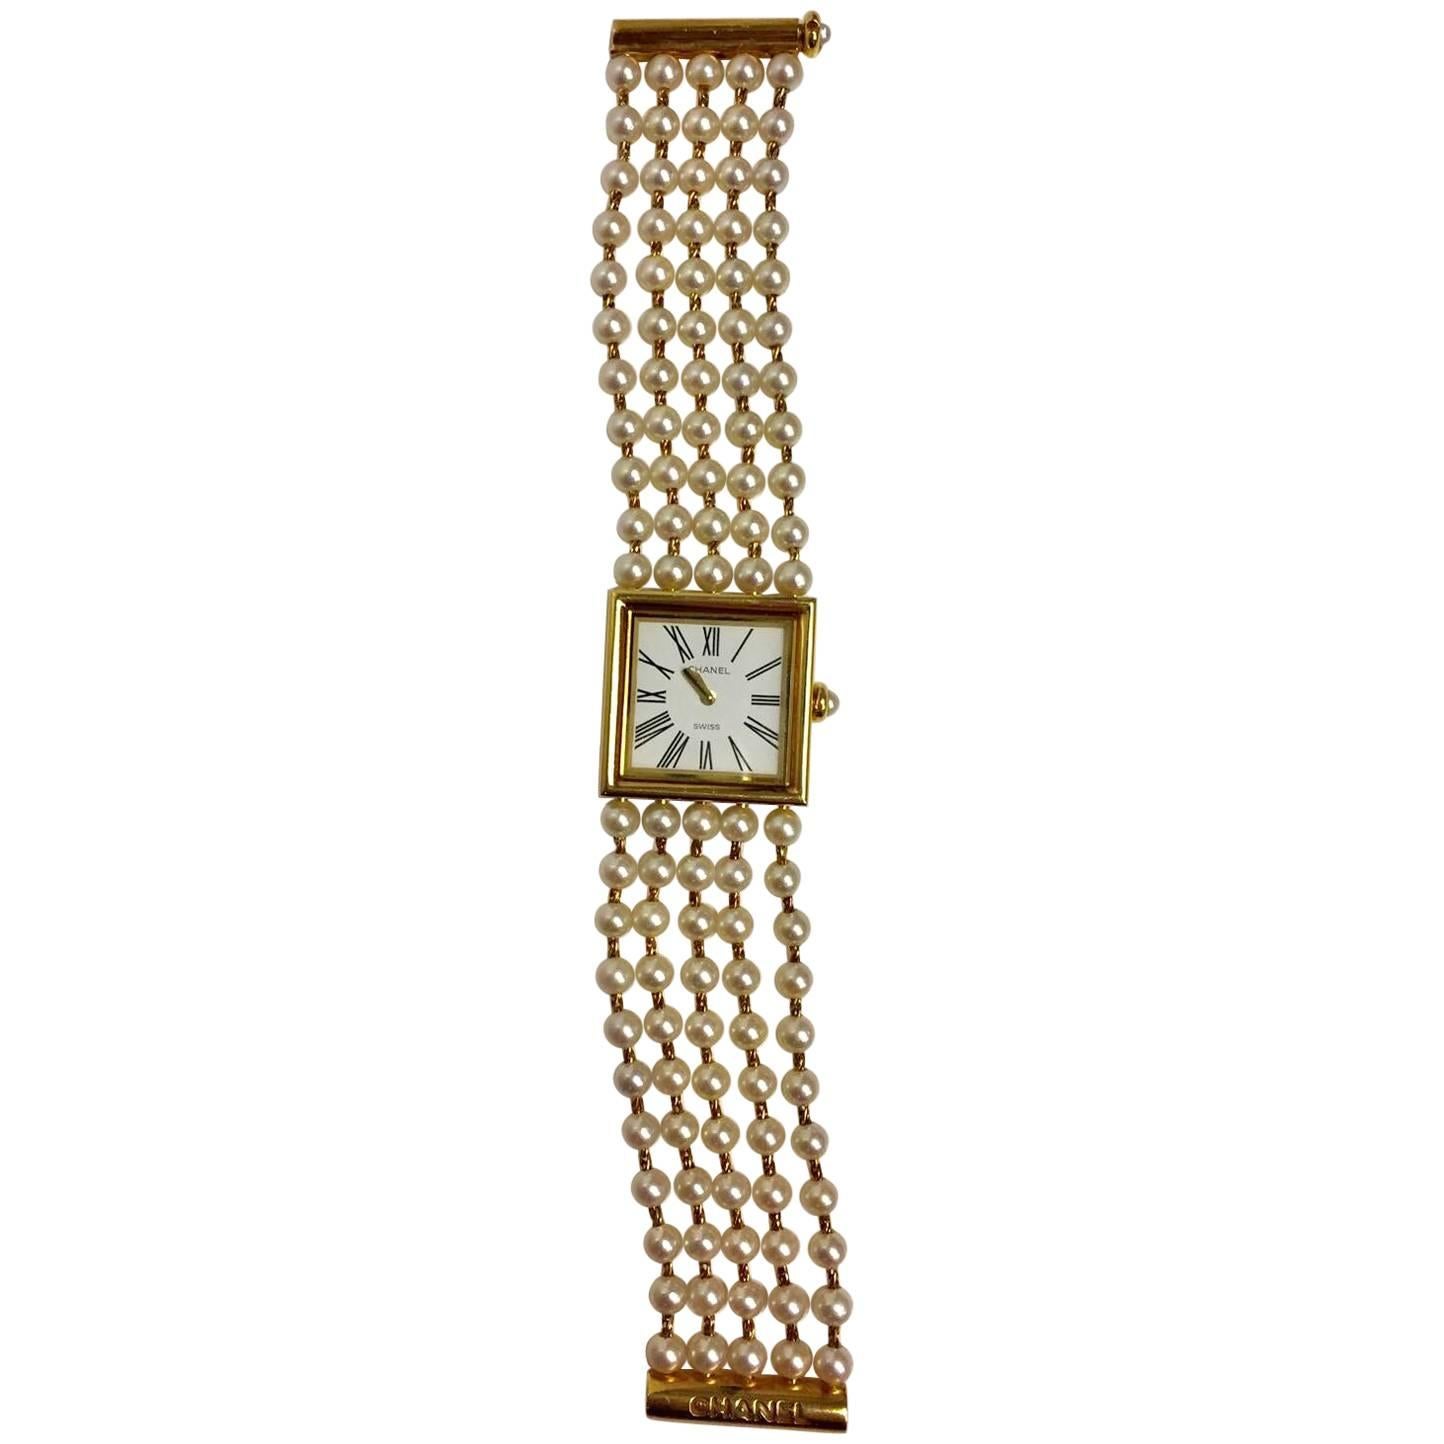 Vintage Chanel 18 Karat Yellow Gold and Pearl Mademoiselle Wristwatch 